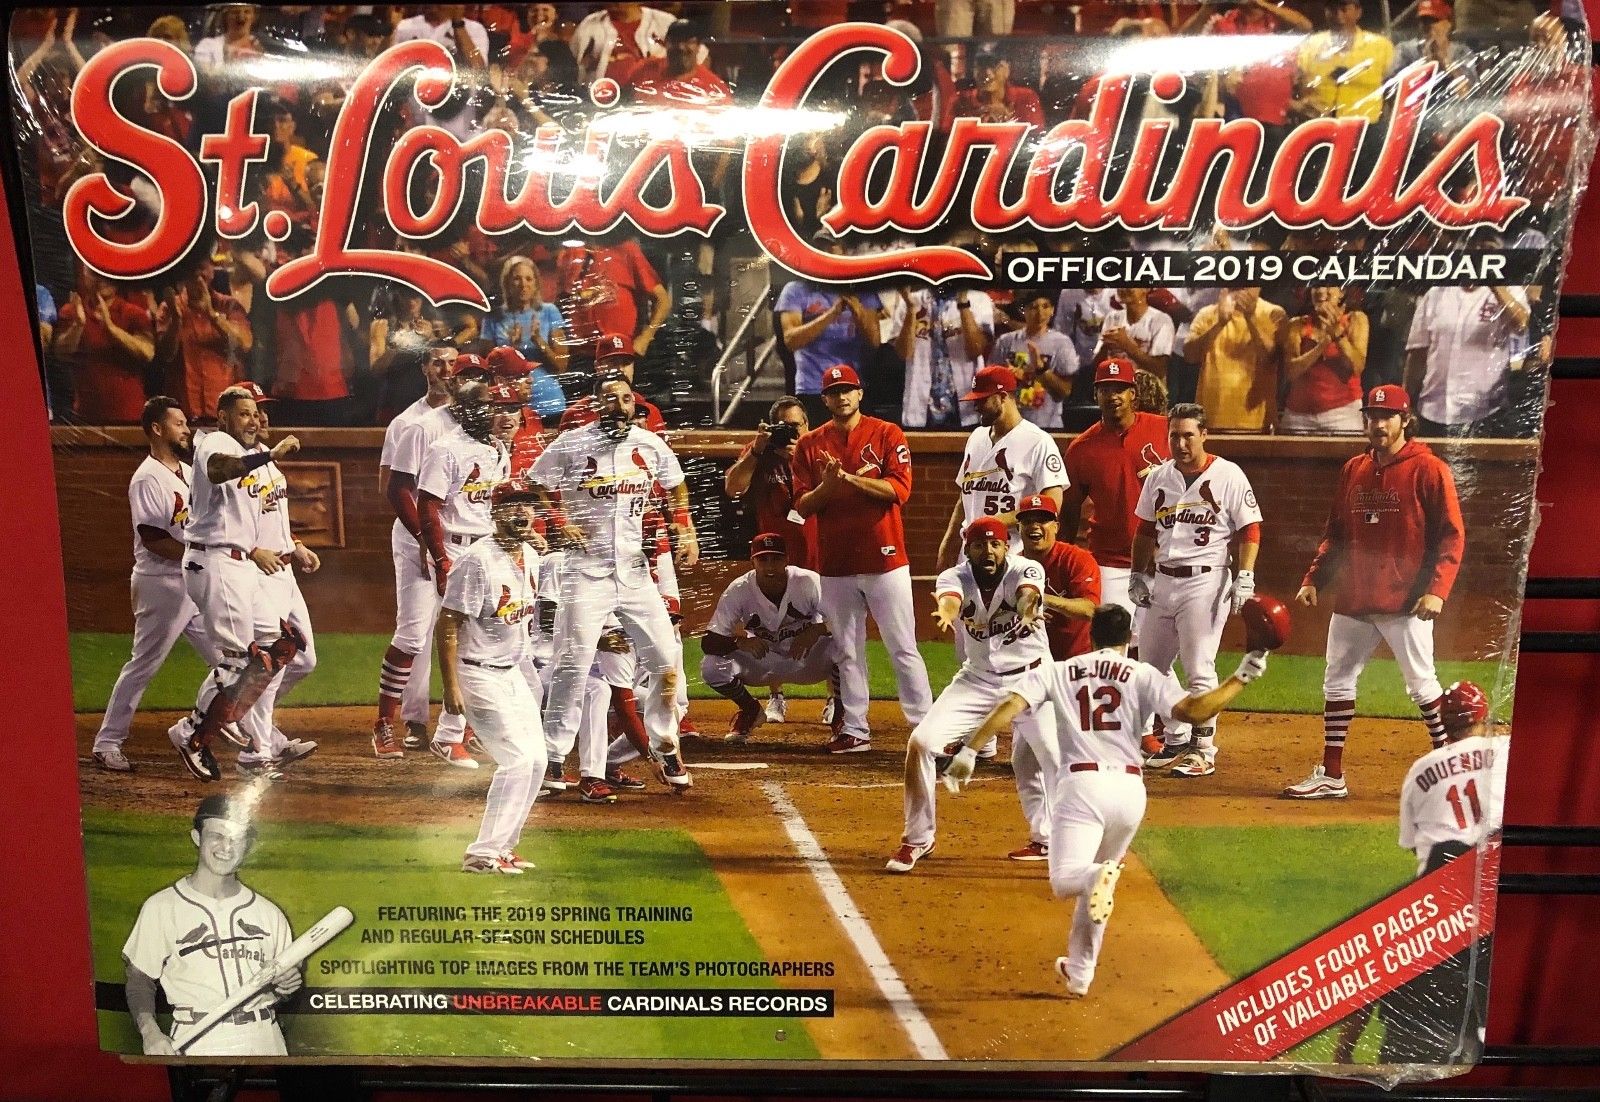 Get Your 2019 Official St. Louis Cardinals Calendar Here! | ArchCity.Media